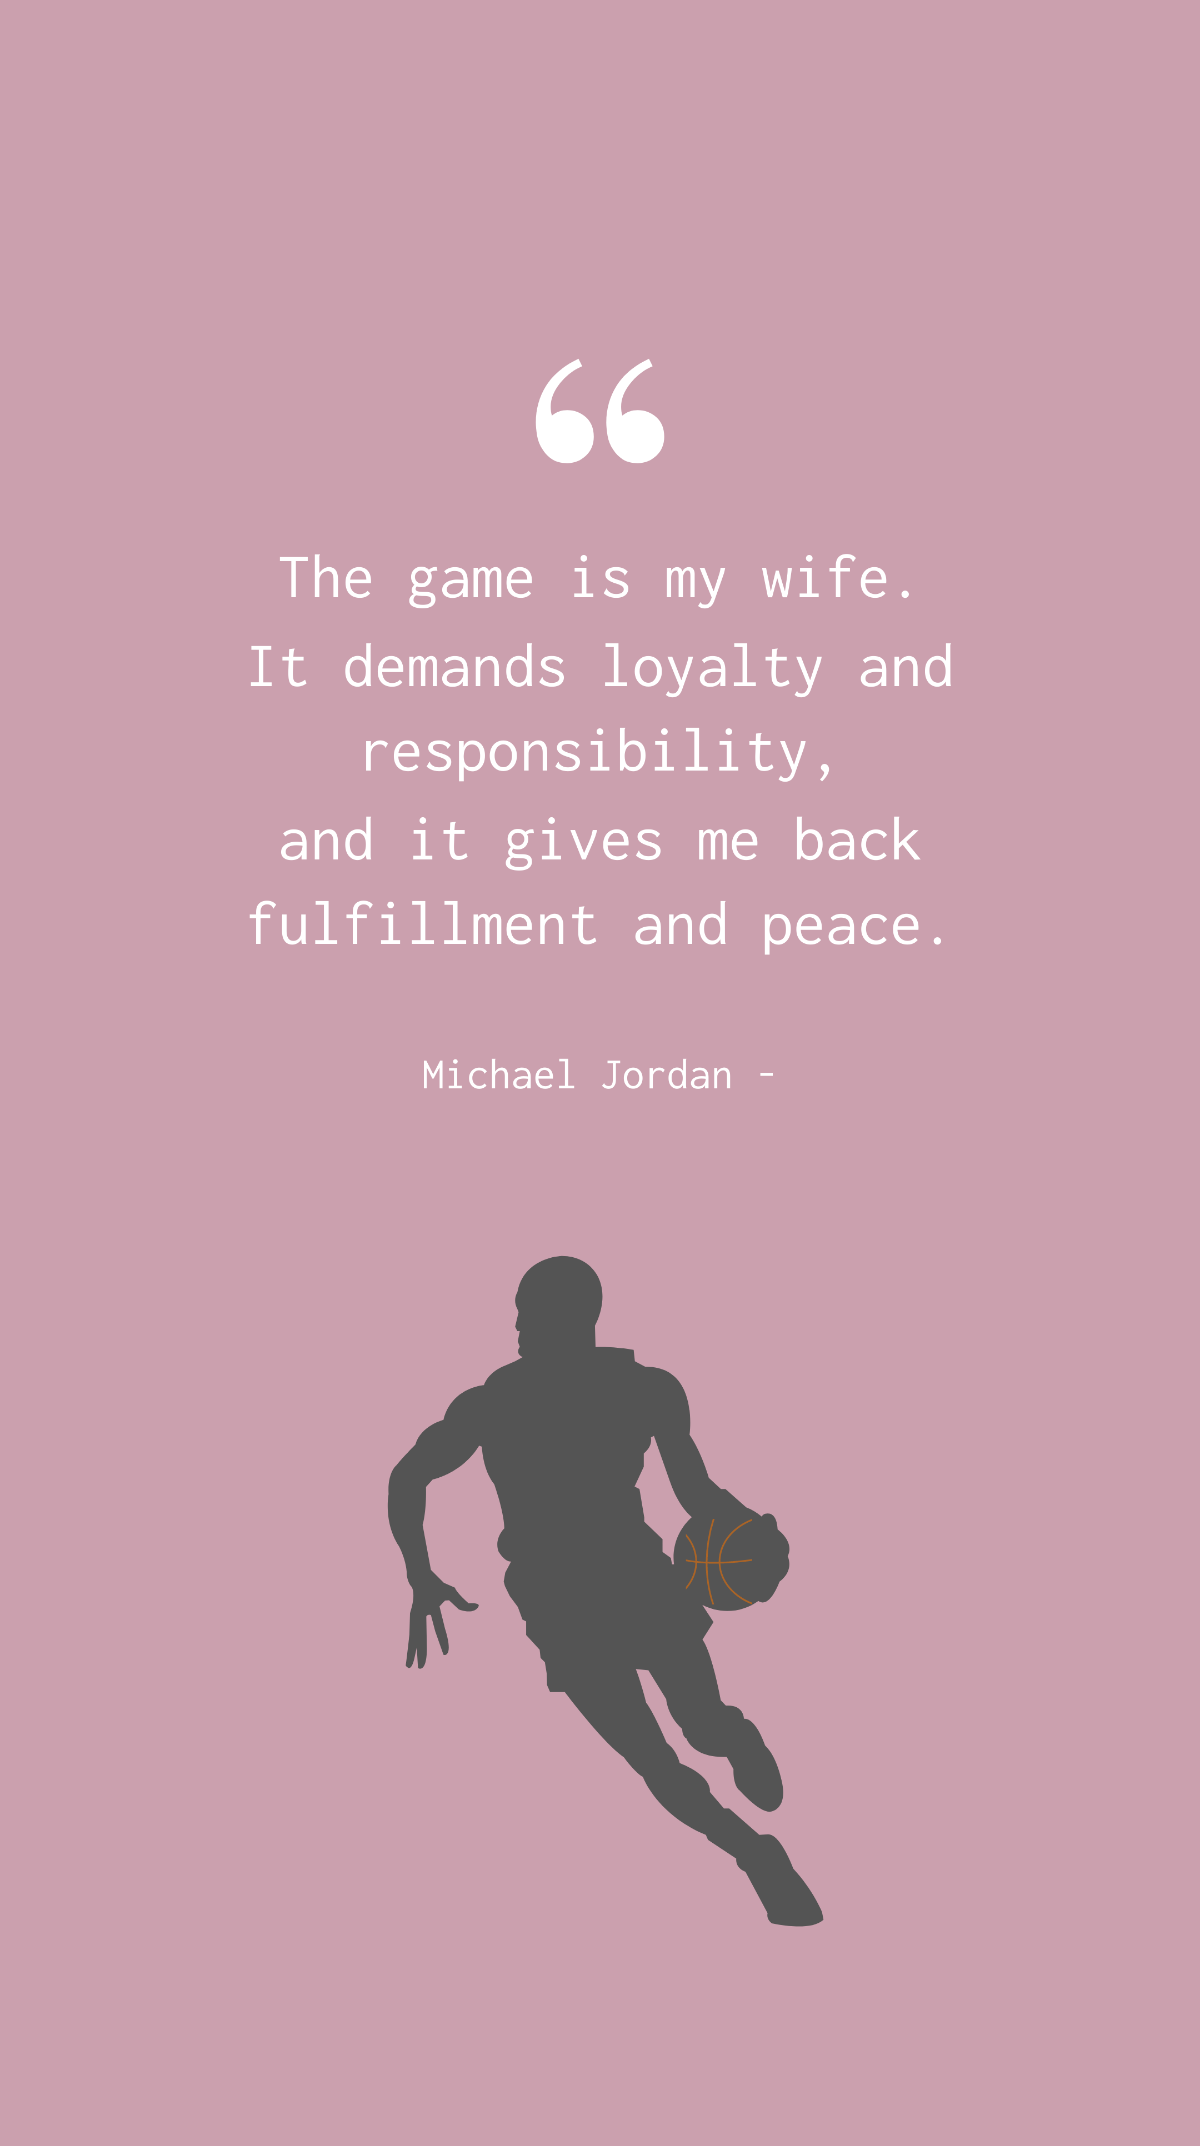 Michael Jordan - The game is my wife. It demands loyalty and responsibility, and it gives me back fulfillment and peace. Template